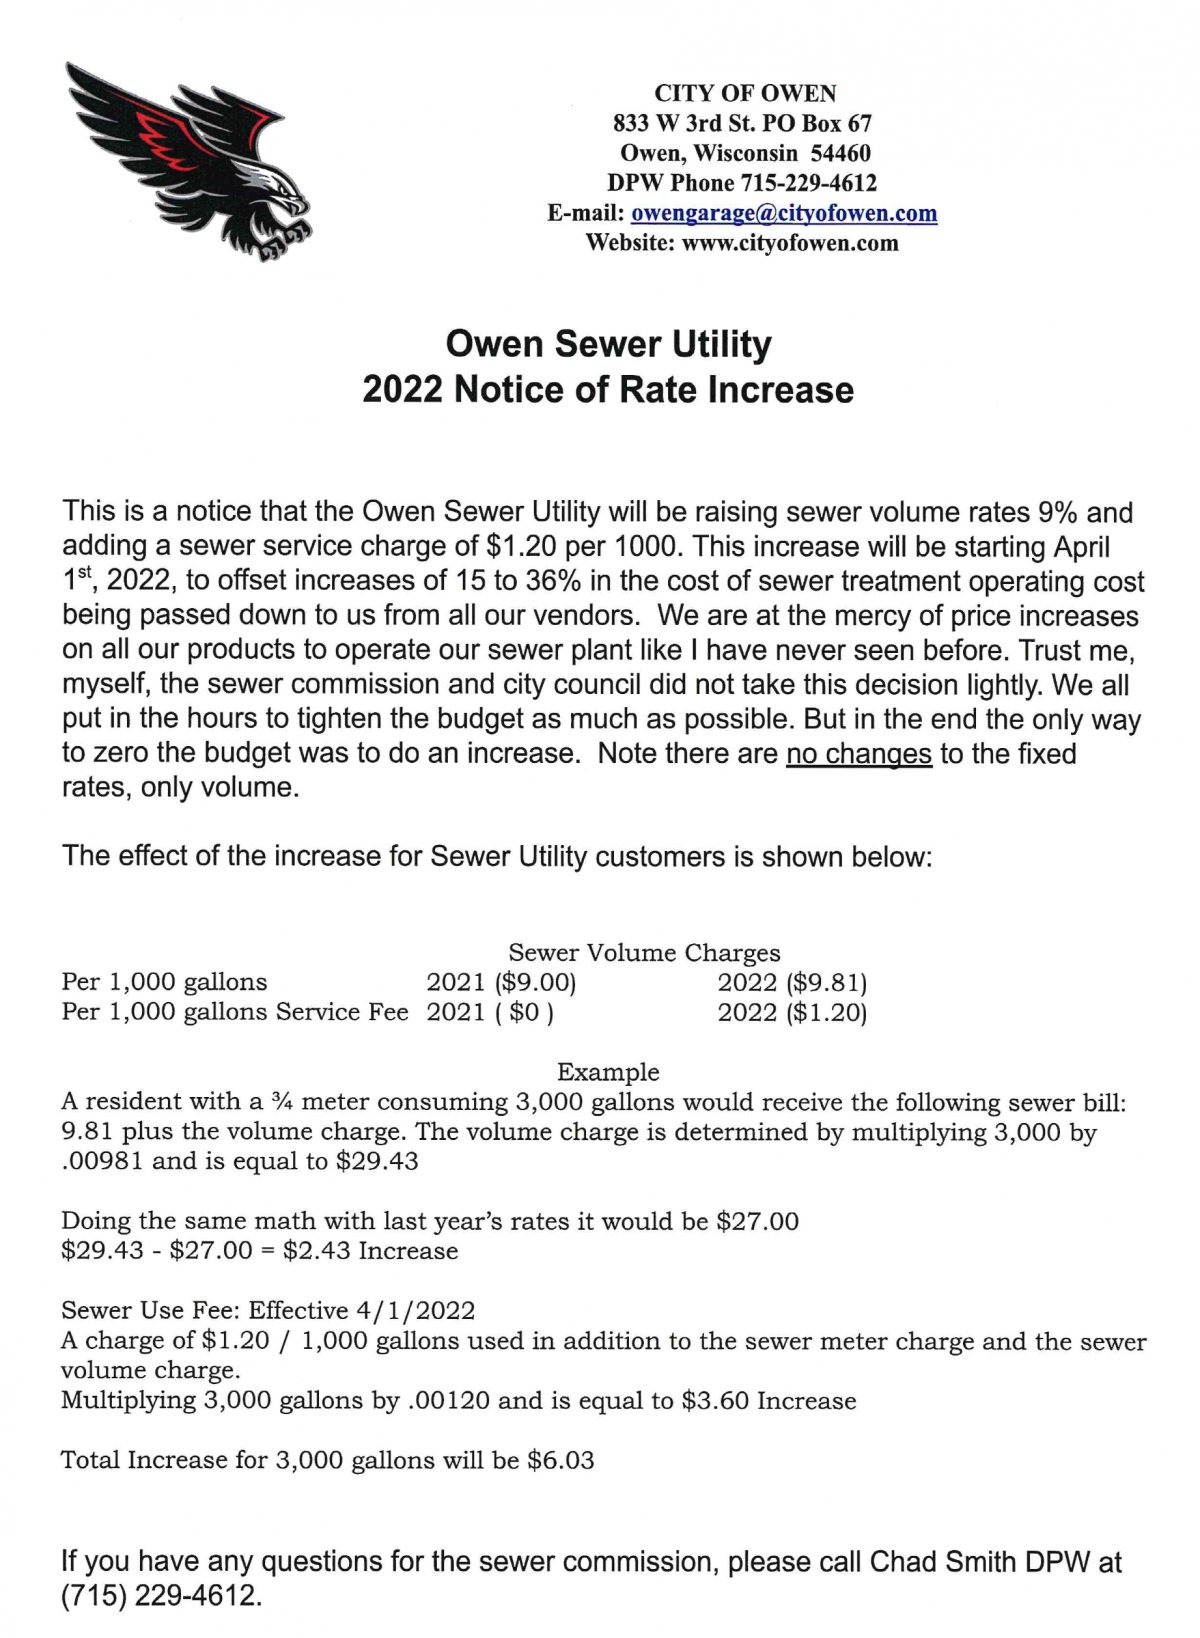 Owen Sewer Utility 2022 Notice of Rate Increase